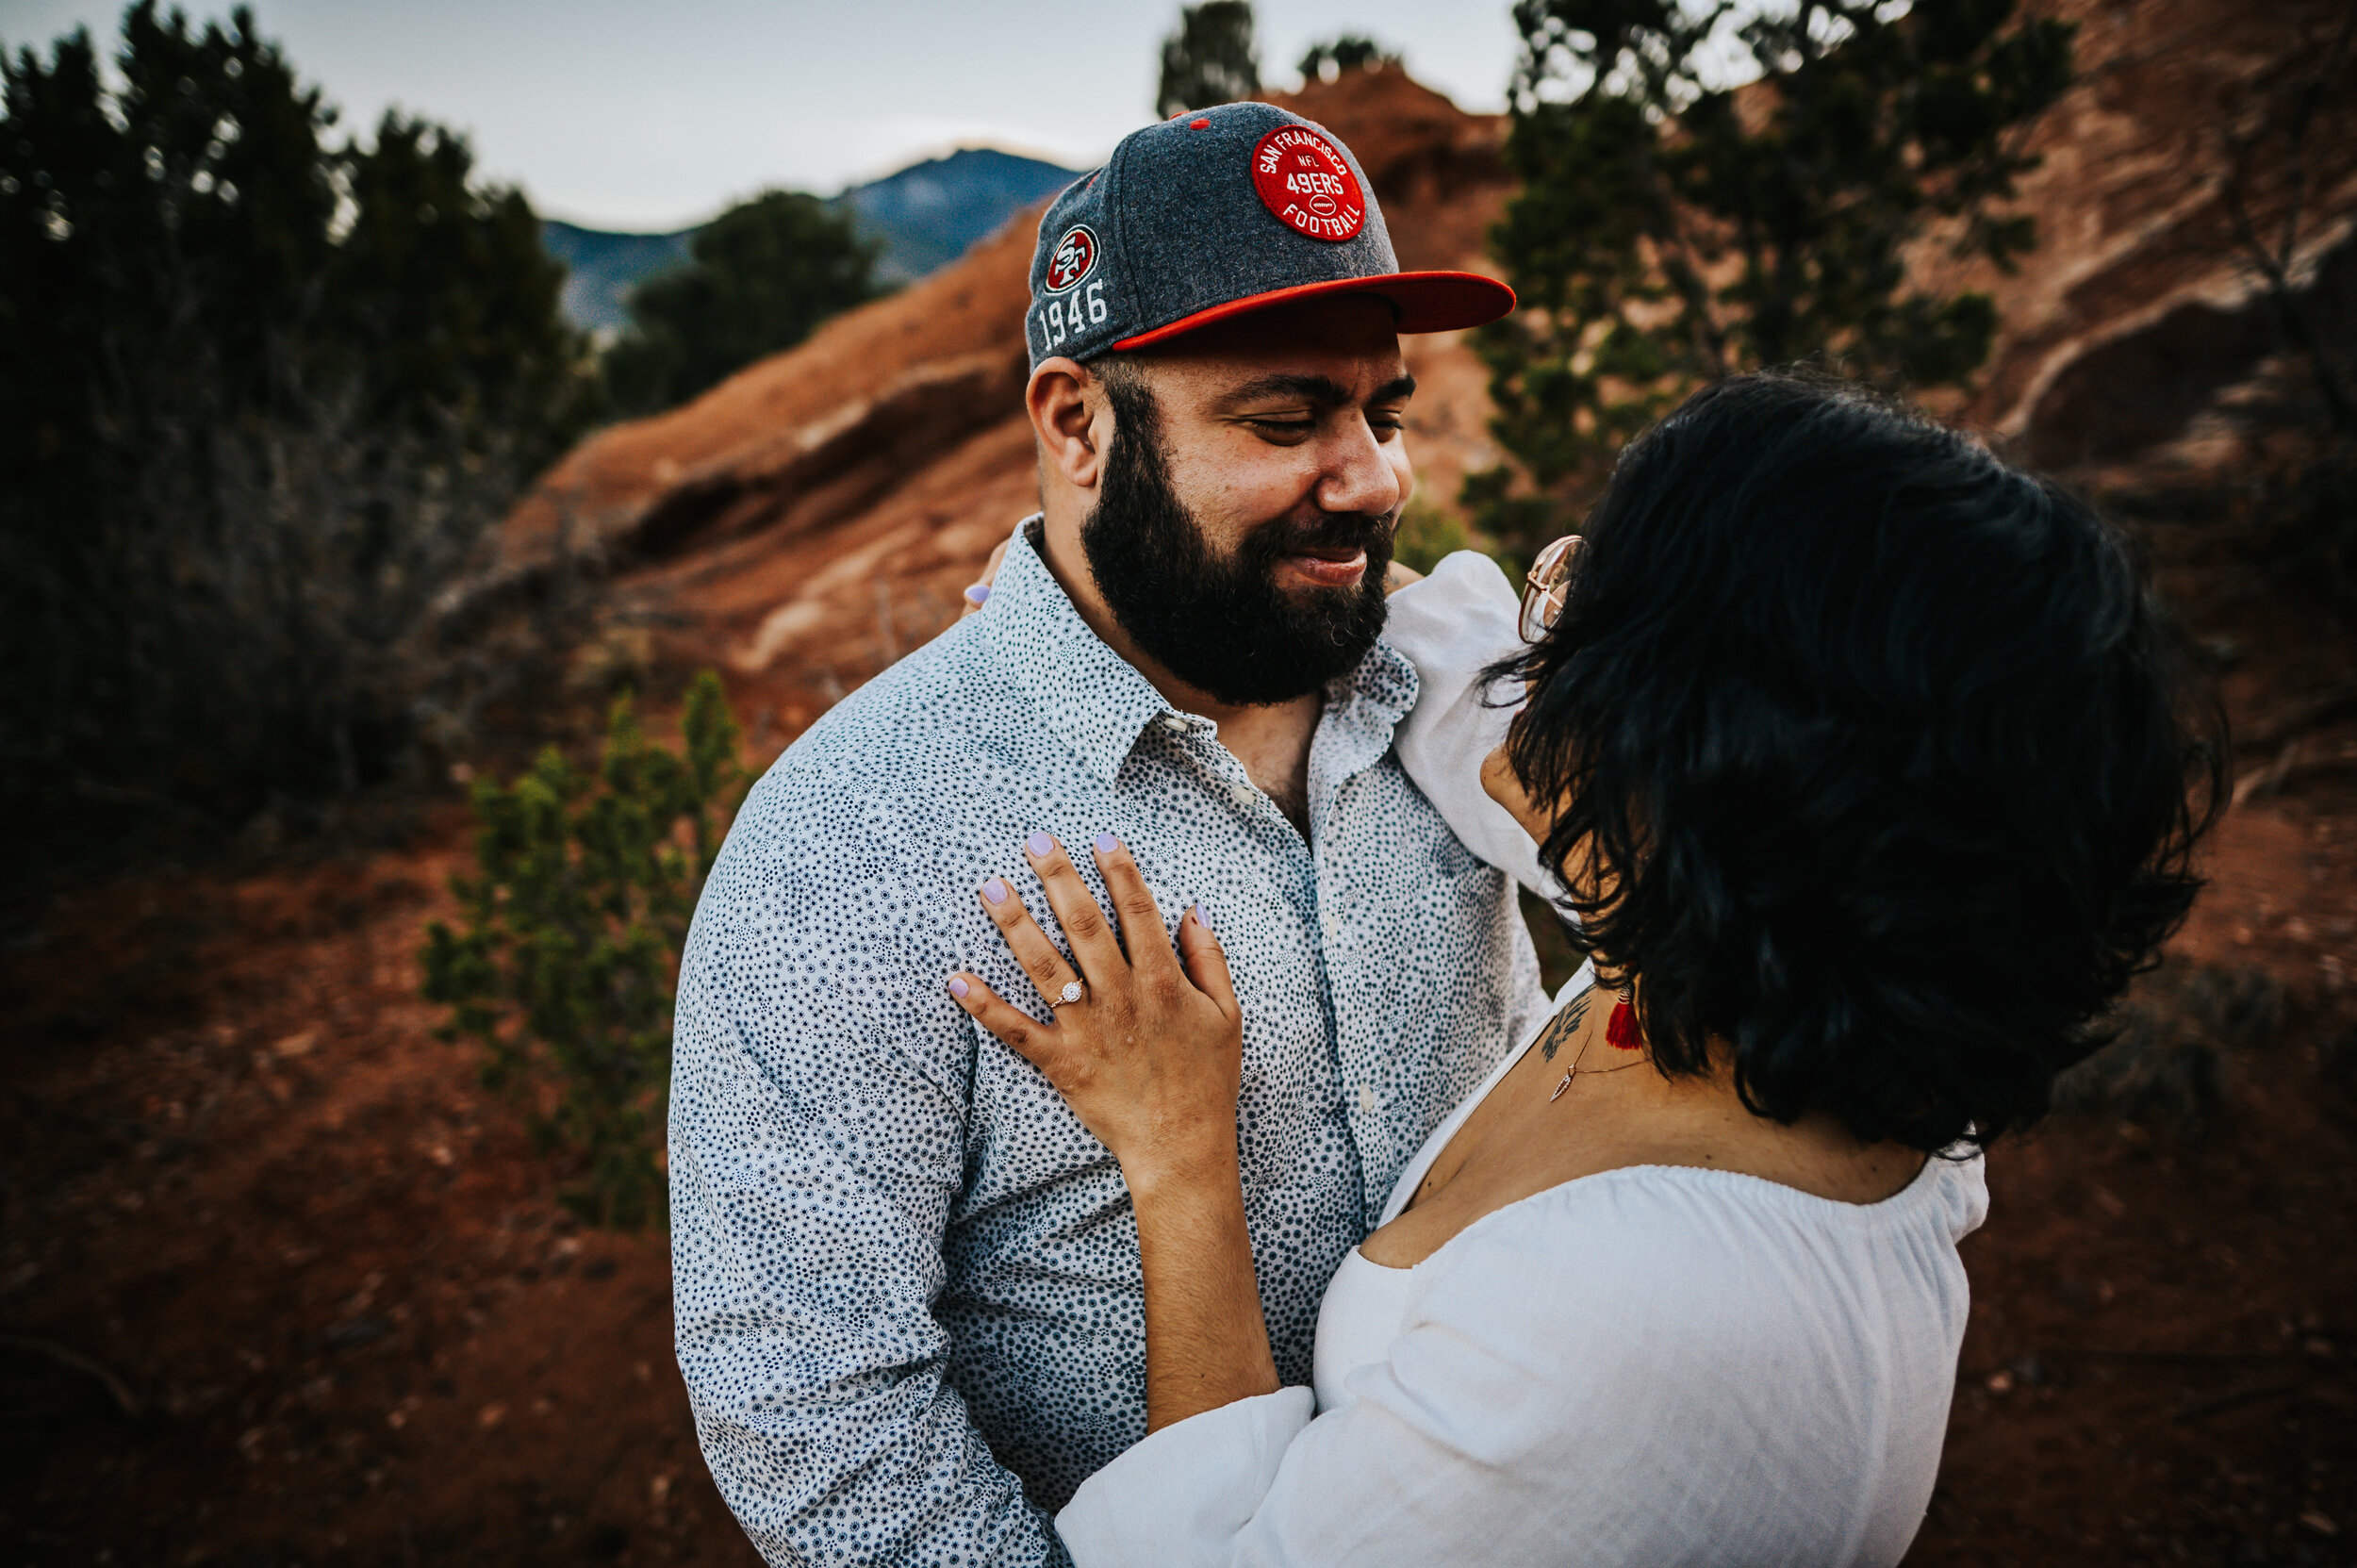 Caroline and Tommy Engagement Session Colorado Springs Colorado Garden of the Gods Wild Prairie Photography-3-2021.jpg